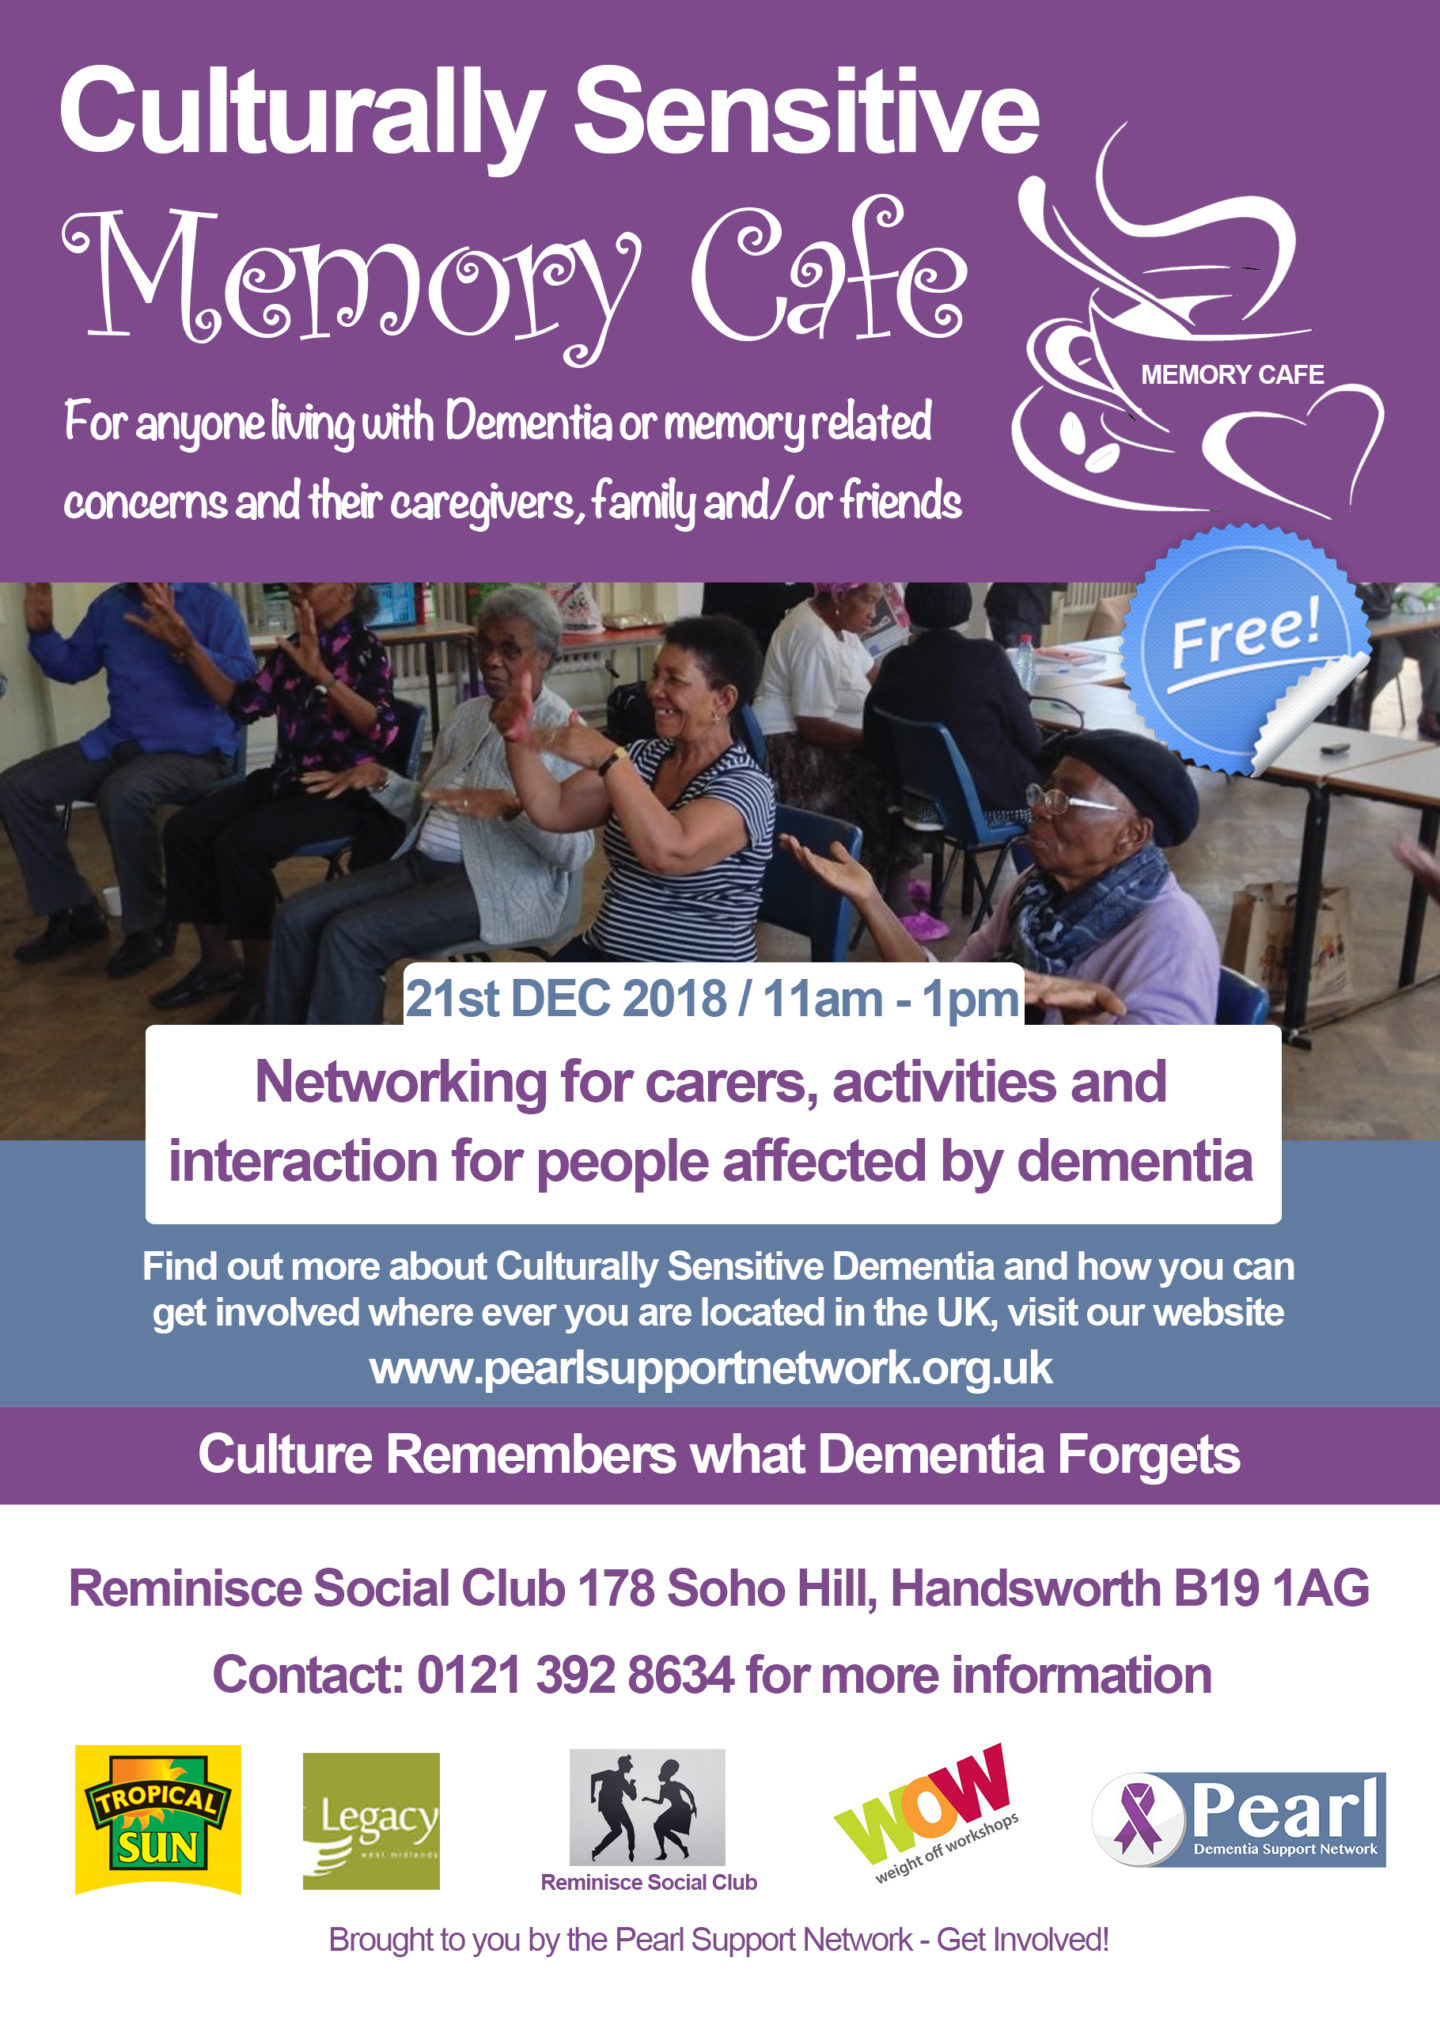 Culturally Sensitive Memory Cafe - Birmingham - Pearl Support Network